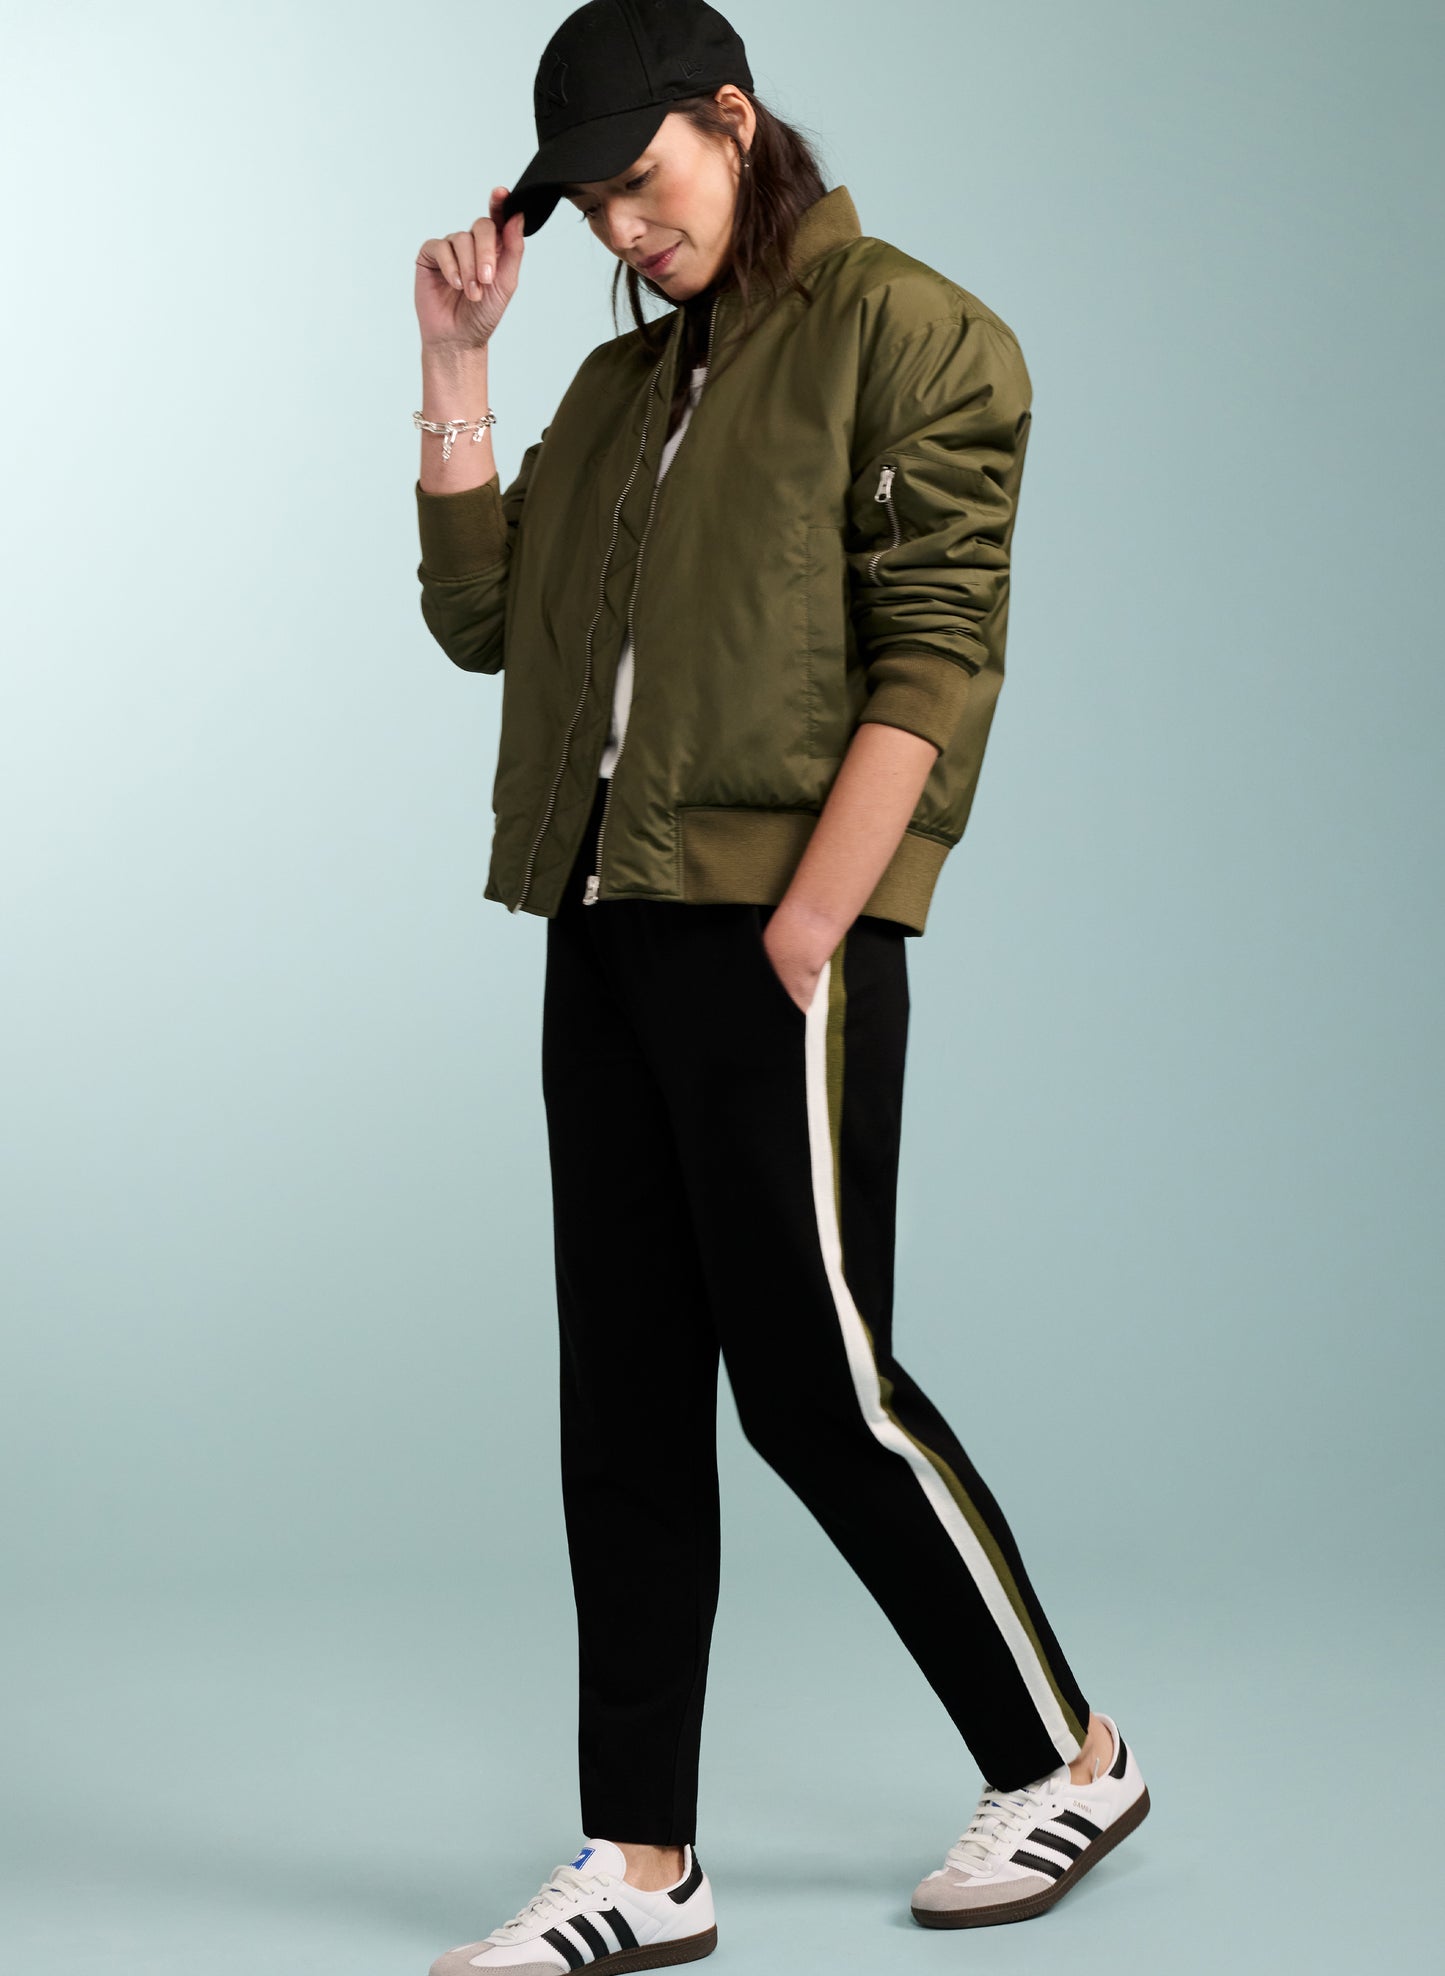 Jay Side Stripe Tapered Trousers